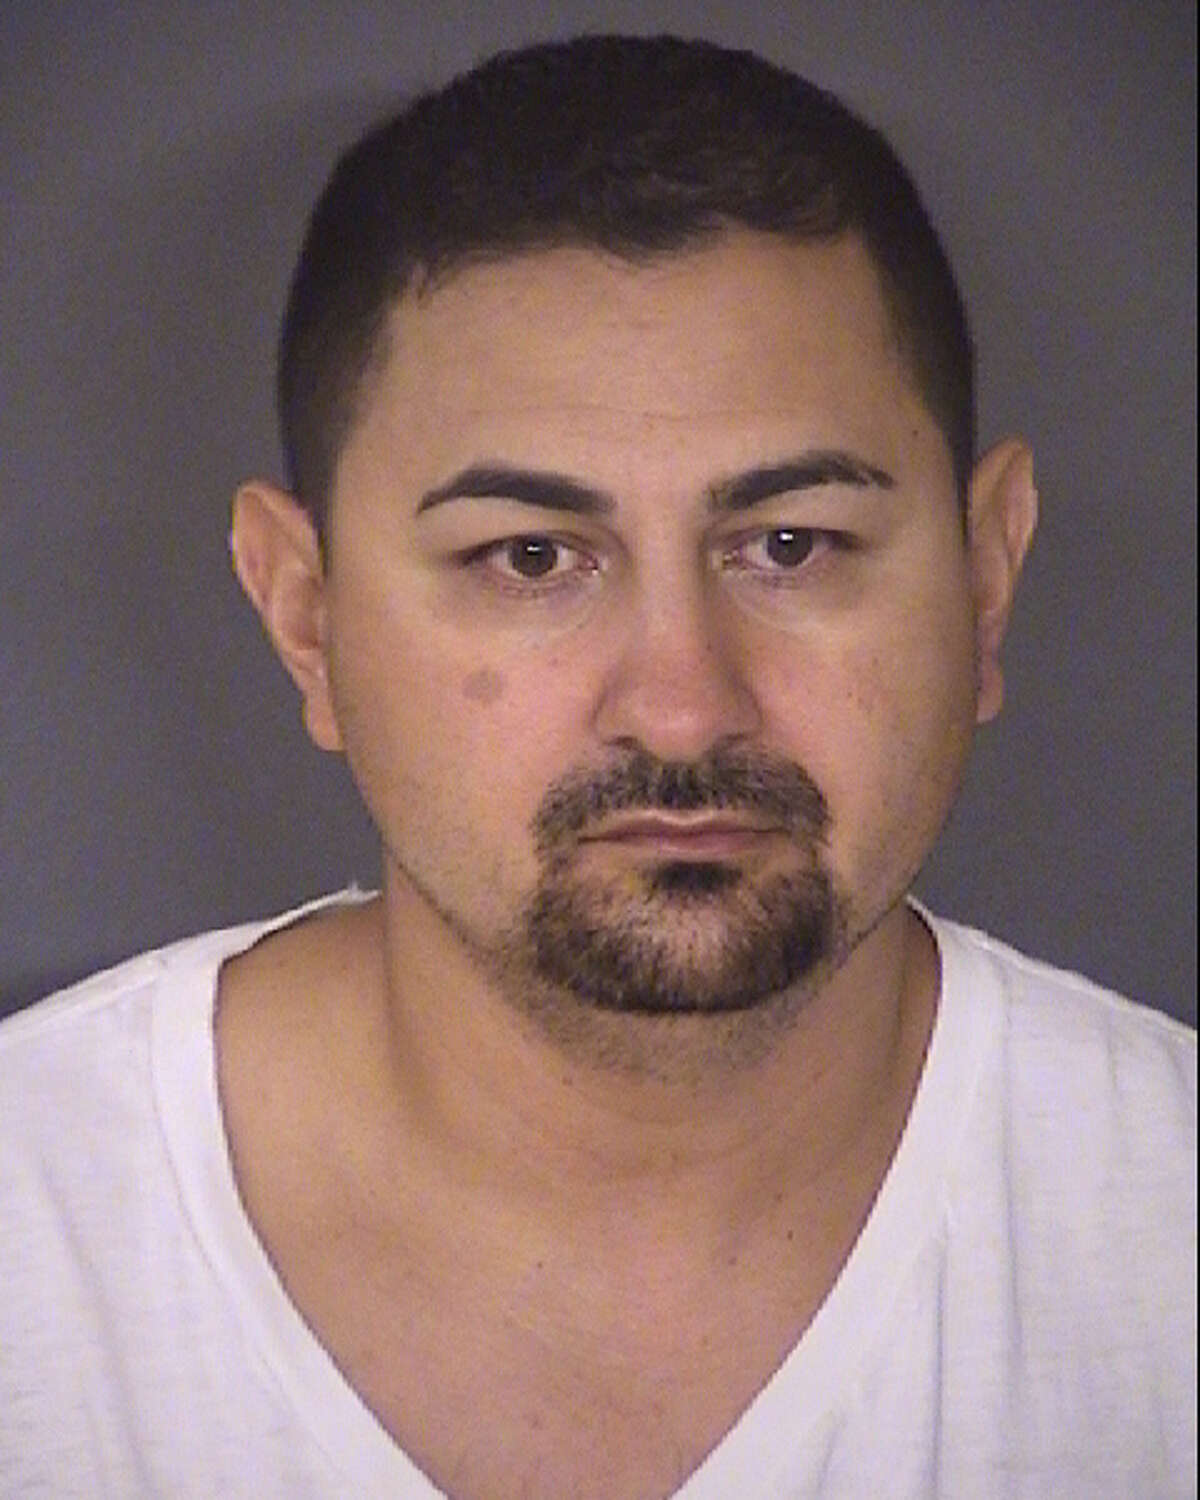 Severo Campos Jr., 42, faces a charge of sexual assault of a child, according to Bexar County Jail records.